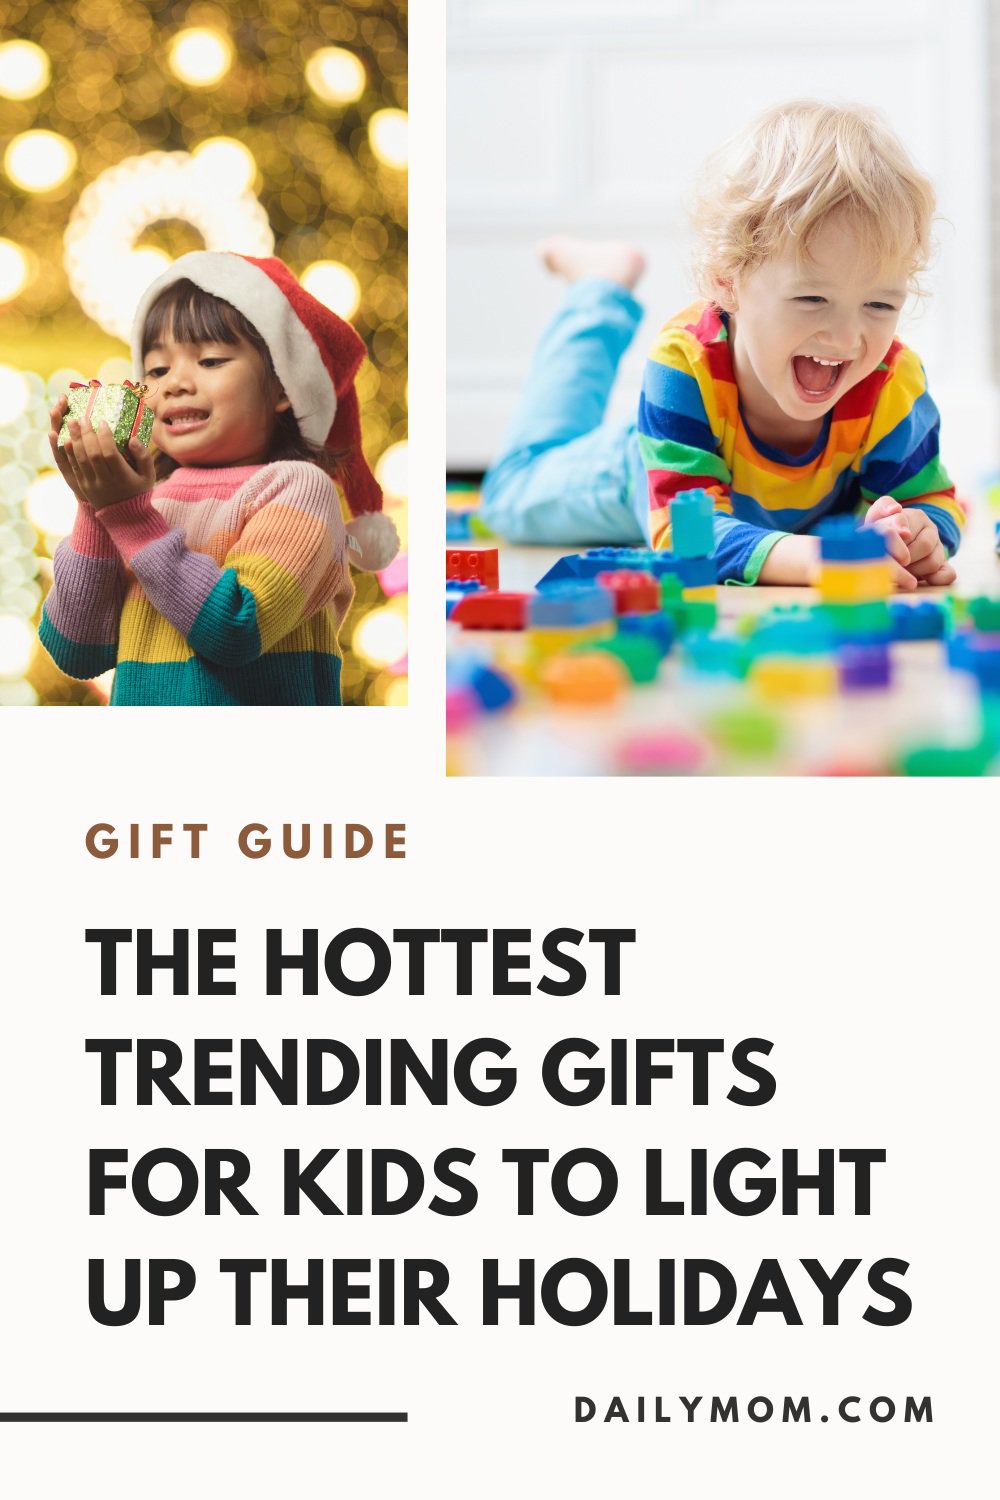 18 Trending Gifts For Kids To Light Up Their Holidays 60 Daily Mom, Magazine For Families